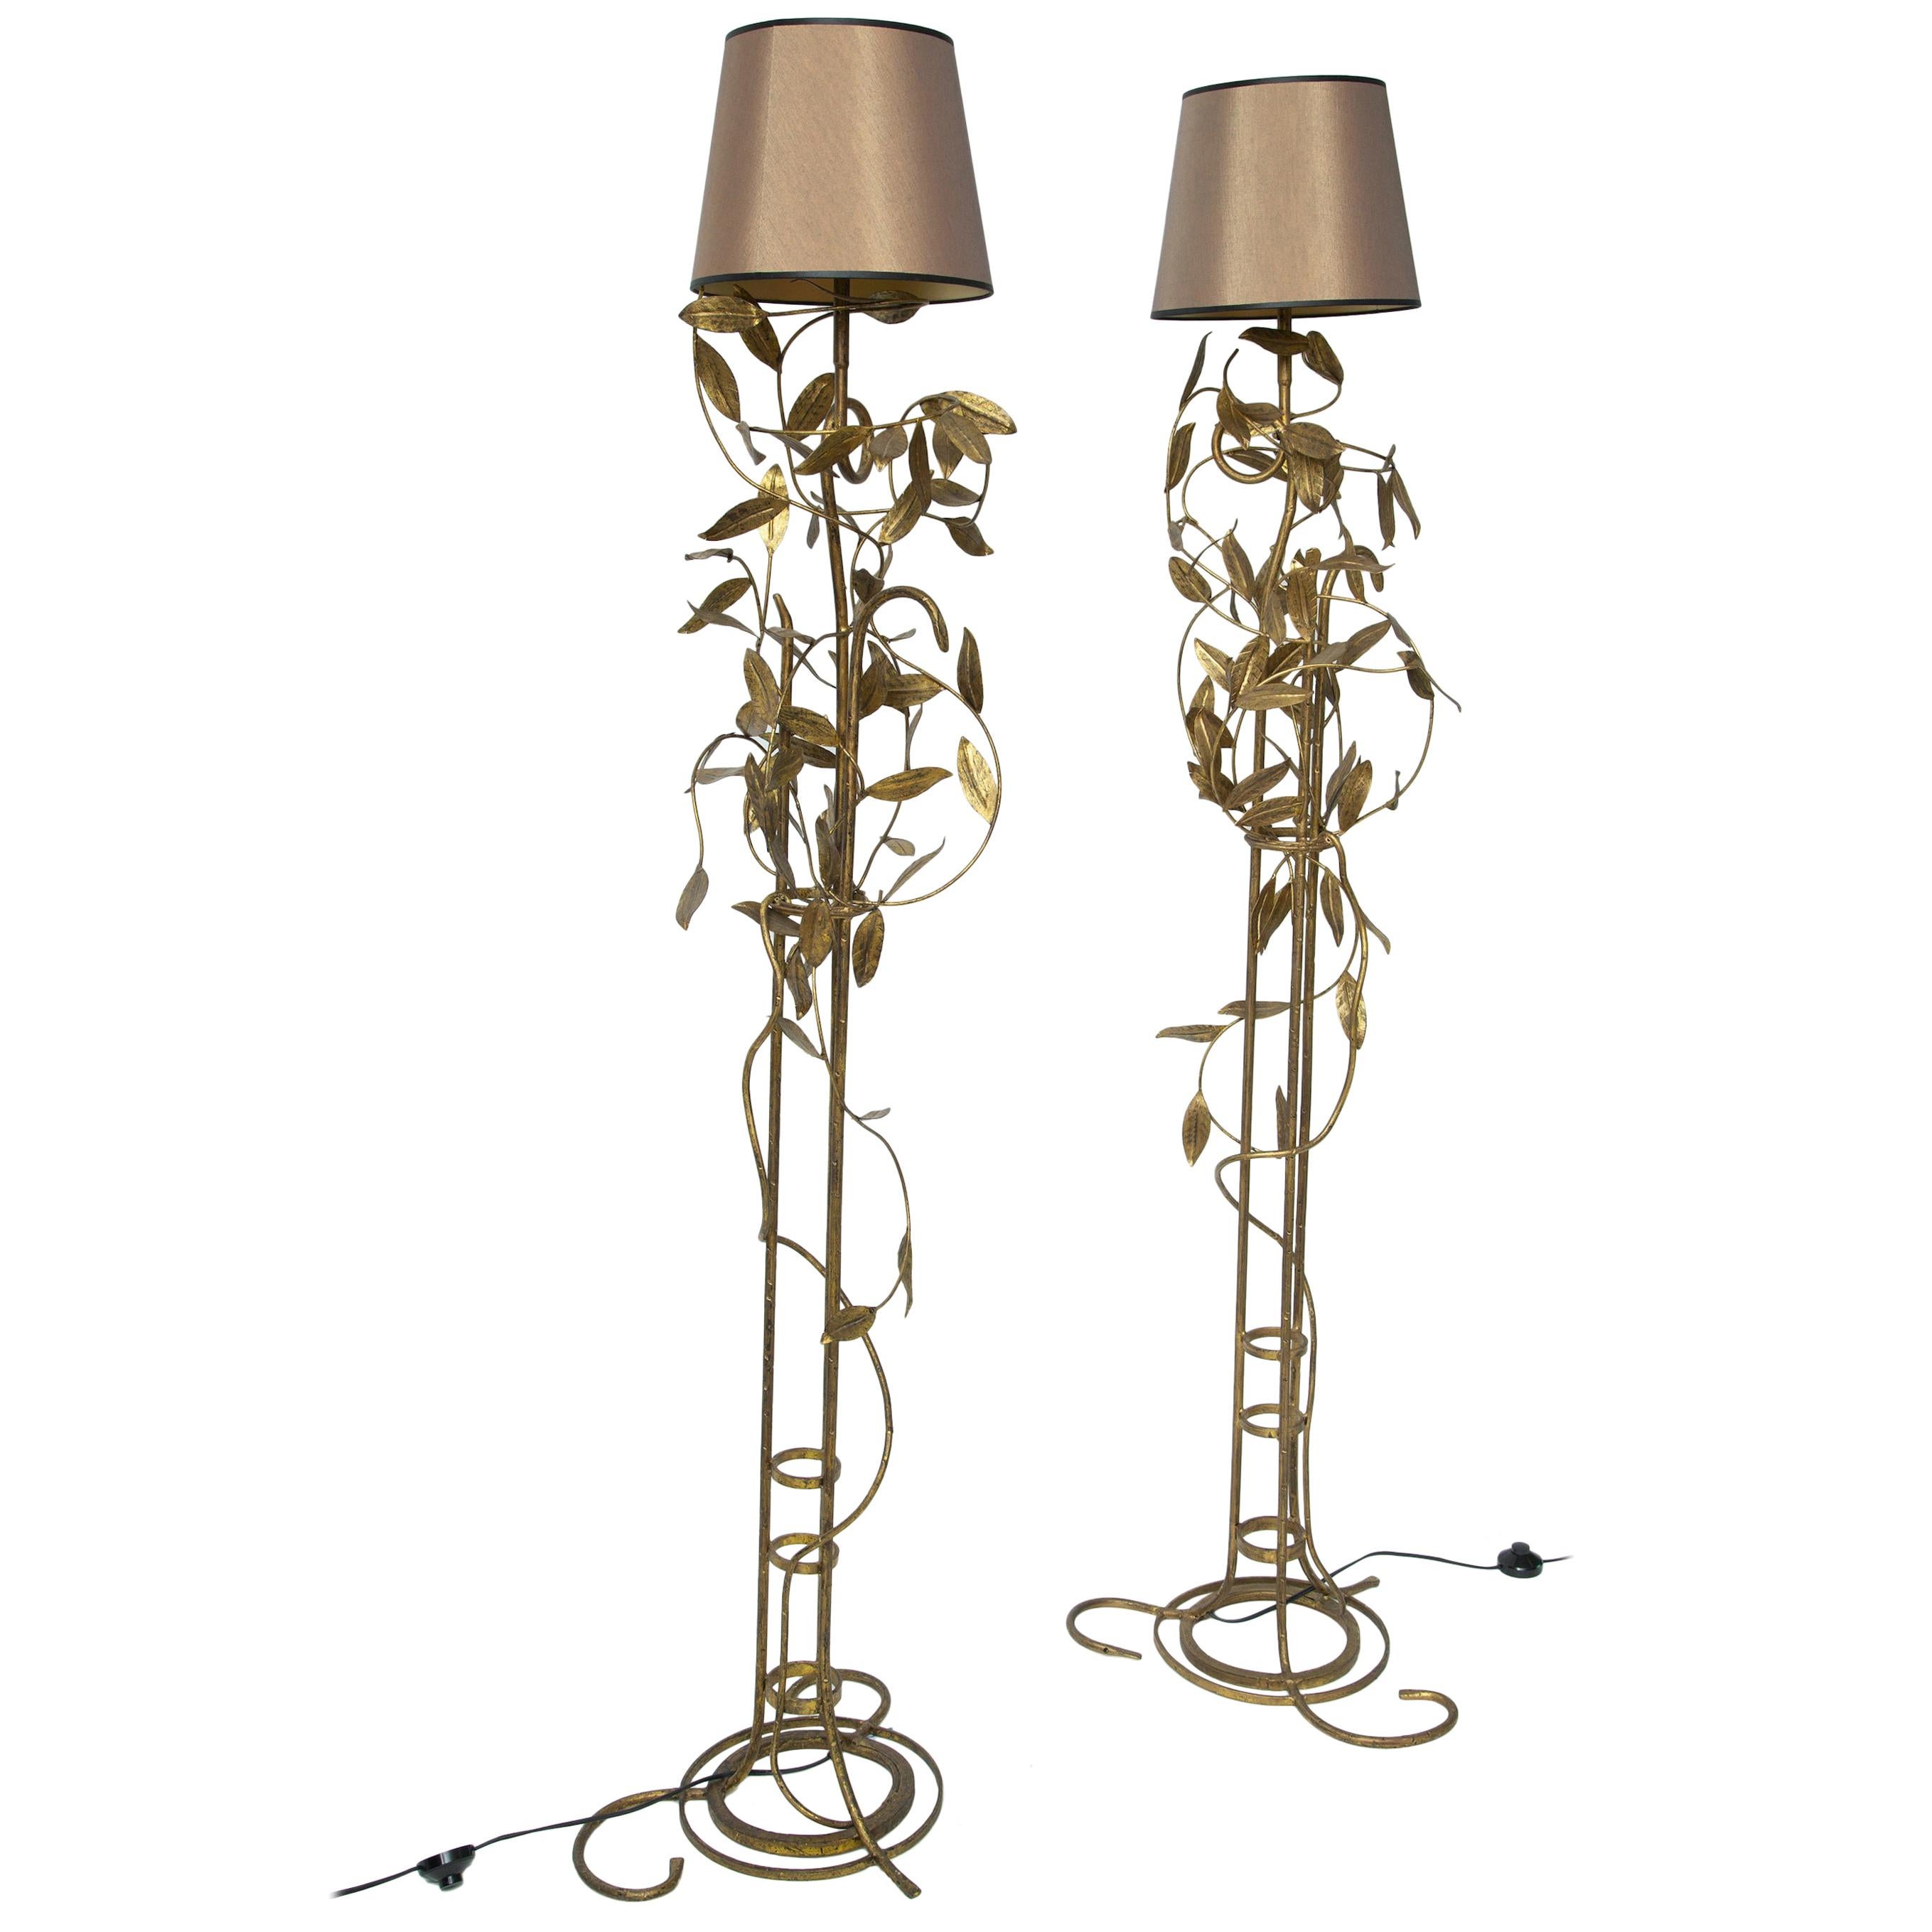 2 Gilt Surface Floor Lamps For Sale